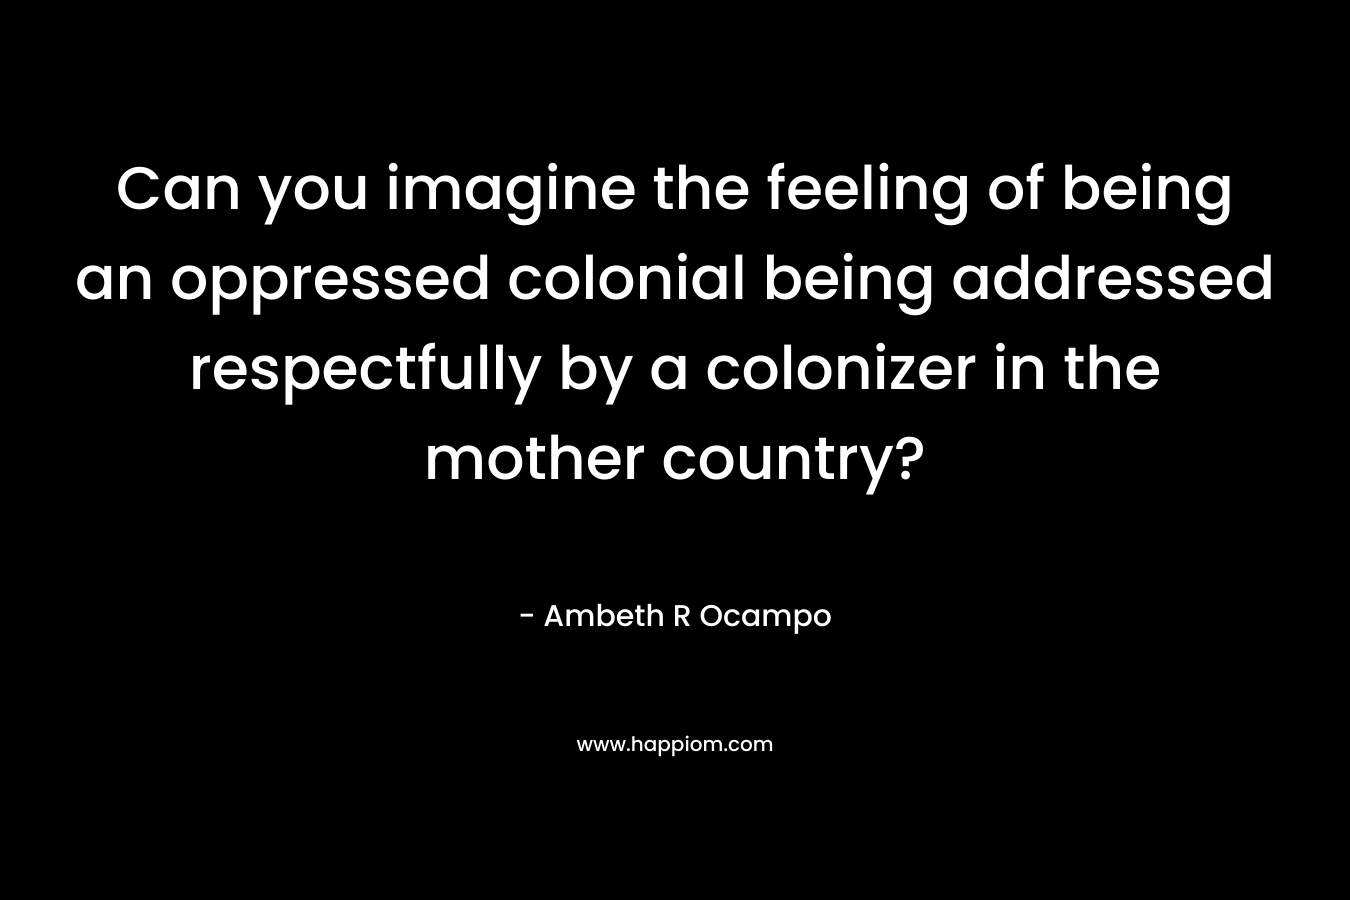 Can you imagine the feeling of being an oppressed colonial being addressed respectfully by a colonizer in the mother country?